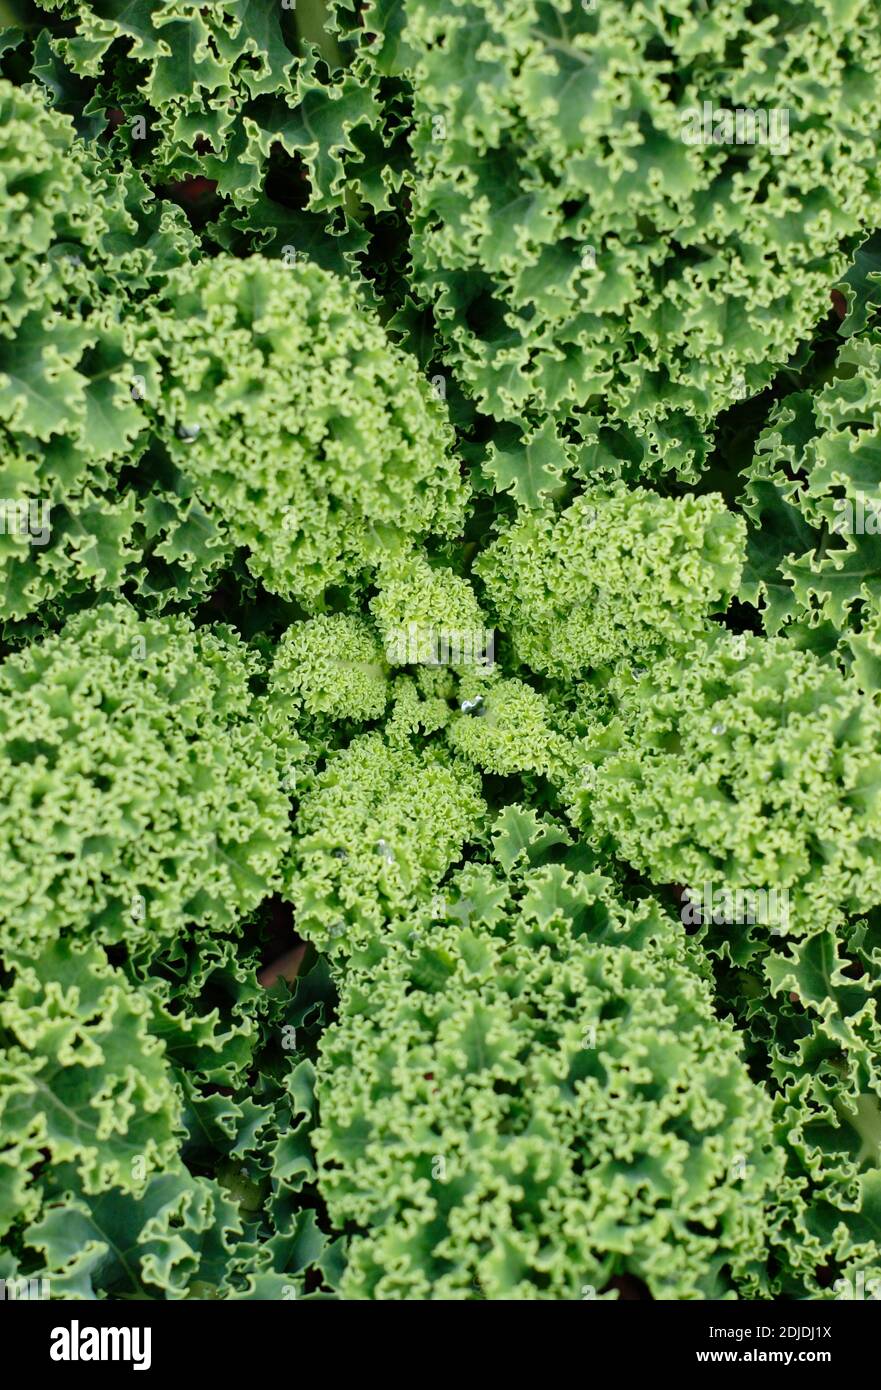 Homegrown curly kale plant growing in a small vegetable plot in a domestic garden. UK. Brassica oleracea Acephala group Stock Photo